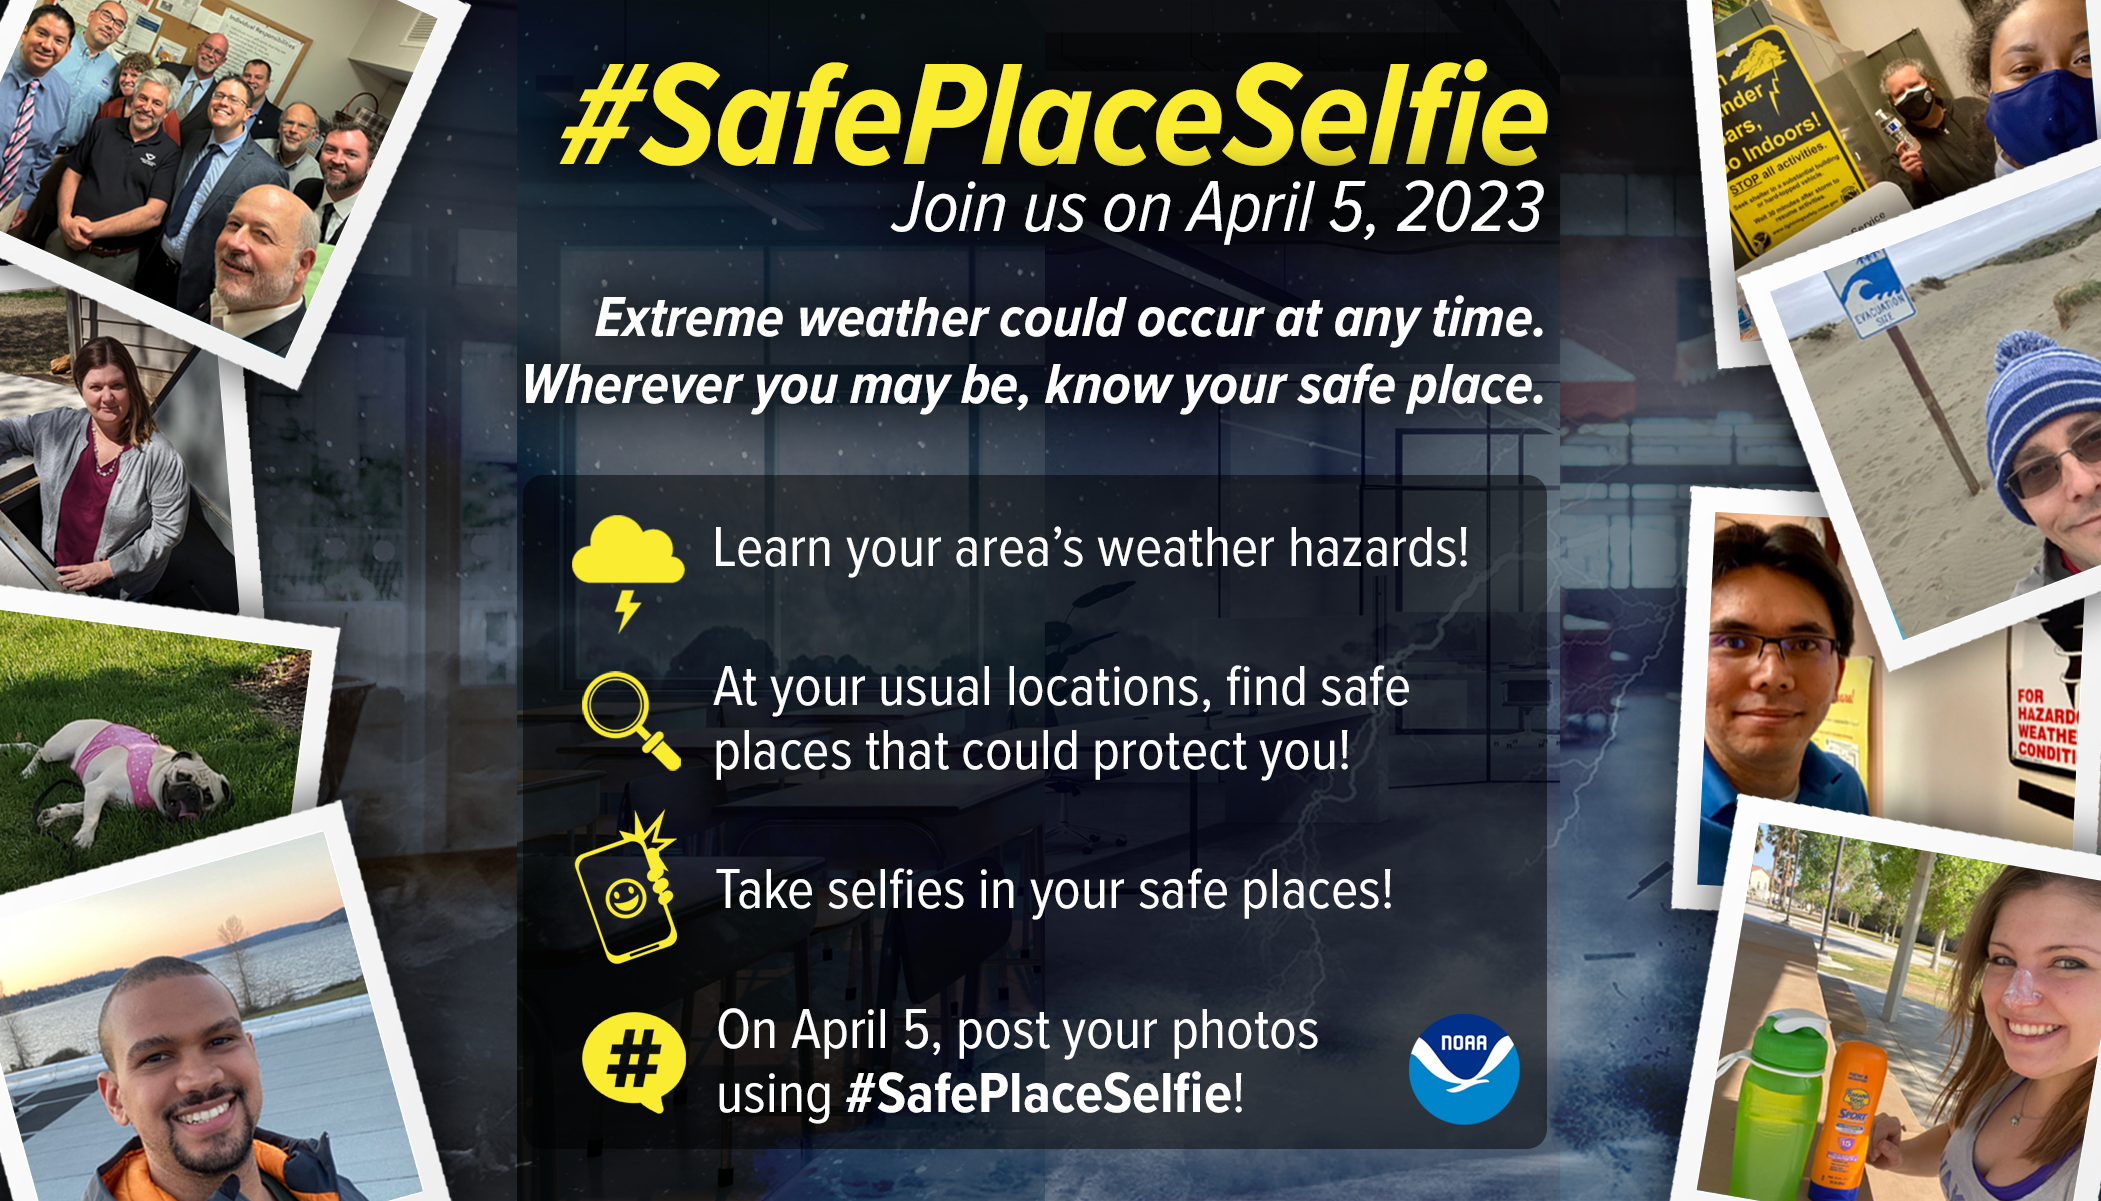 #SafePlaceSelfie - Join us on April 5, 2023. Extreme weather could occur at any time. Wherever you may be, know your safe place. Learn your area's weather hazards! At your usual locations, find safe places that could protect you! Take selfies in your safe places! On April 5, post your photos using #SafePlaceSelfie!